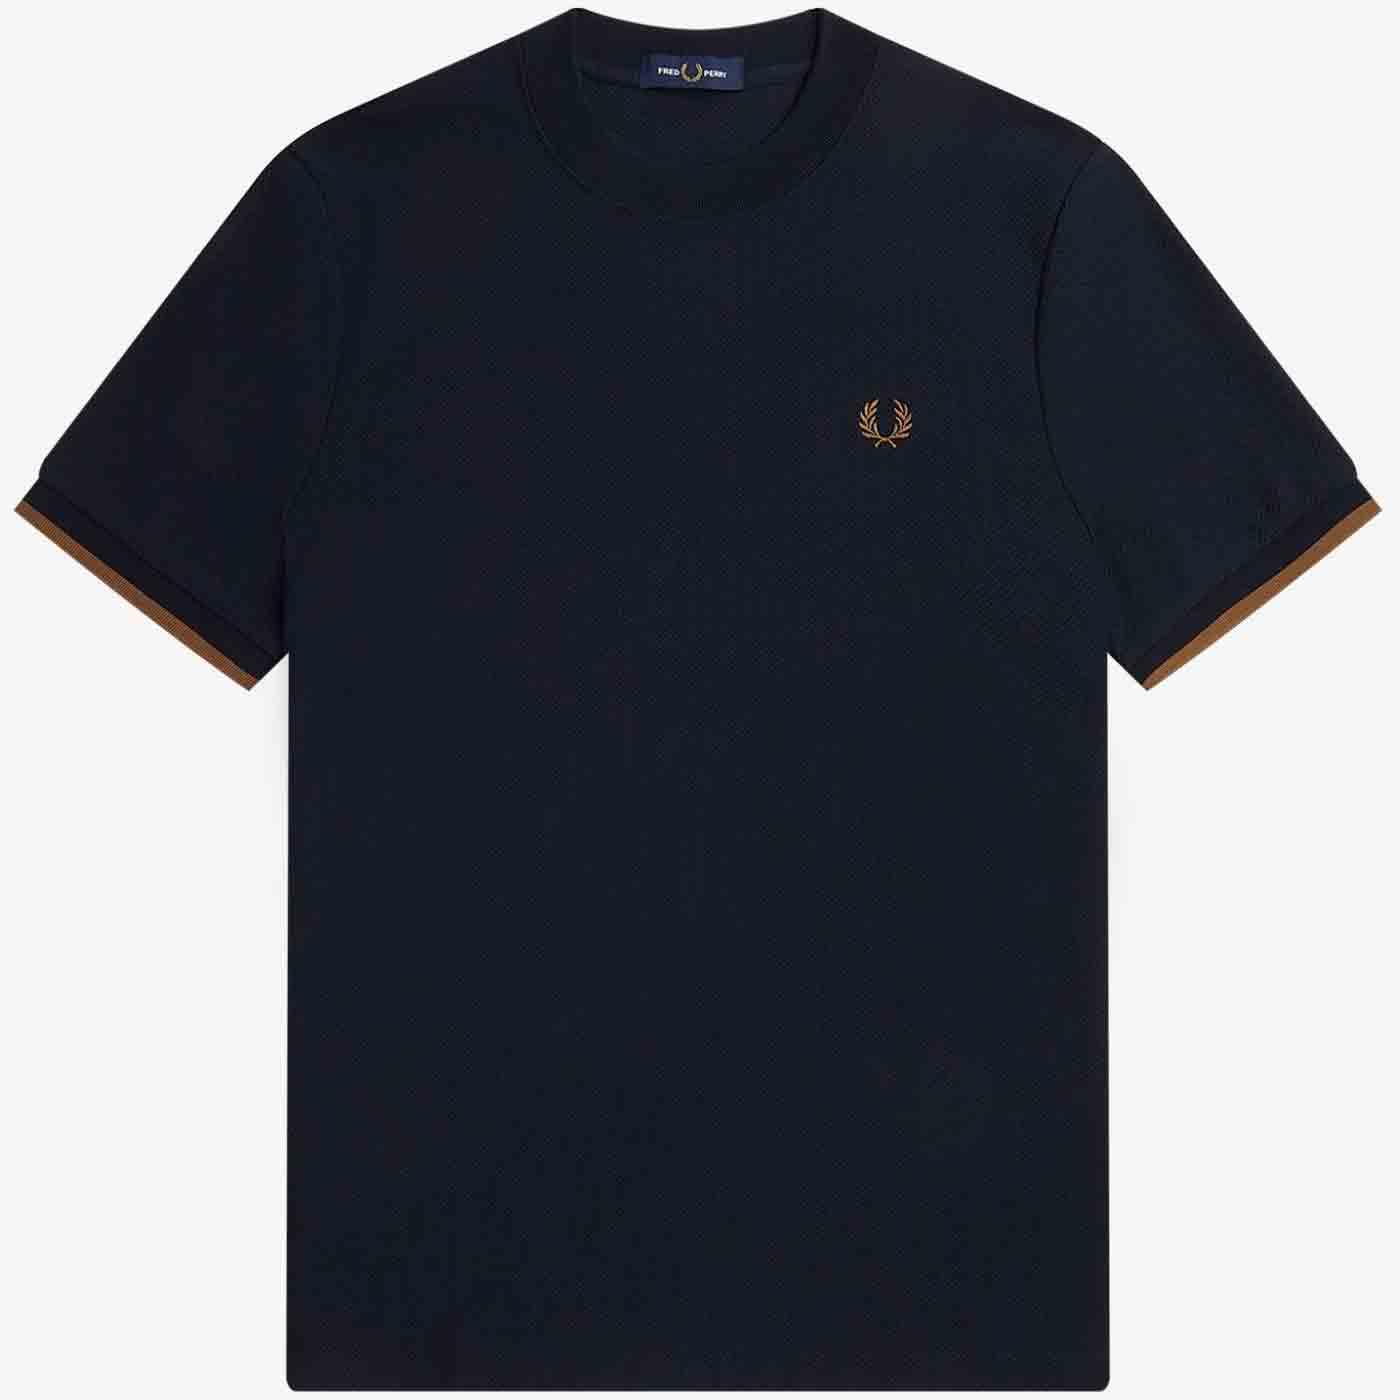 Fred Perry Retro Tipped Cuff Pique T-shirt Navy